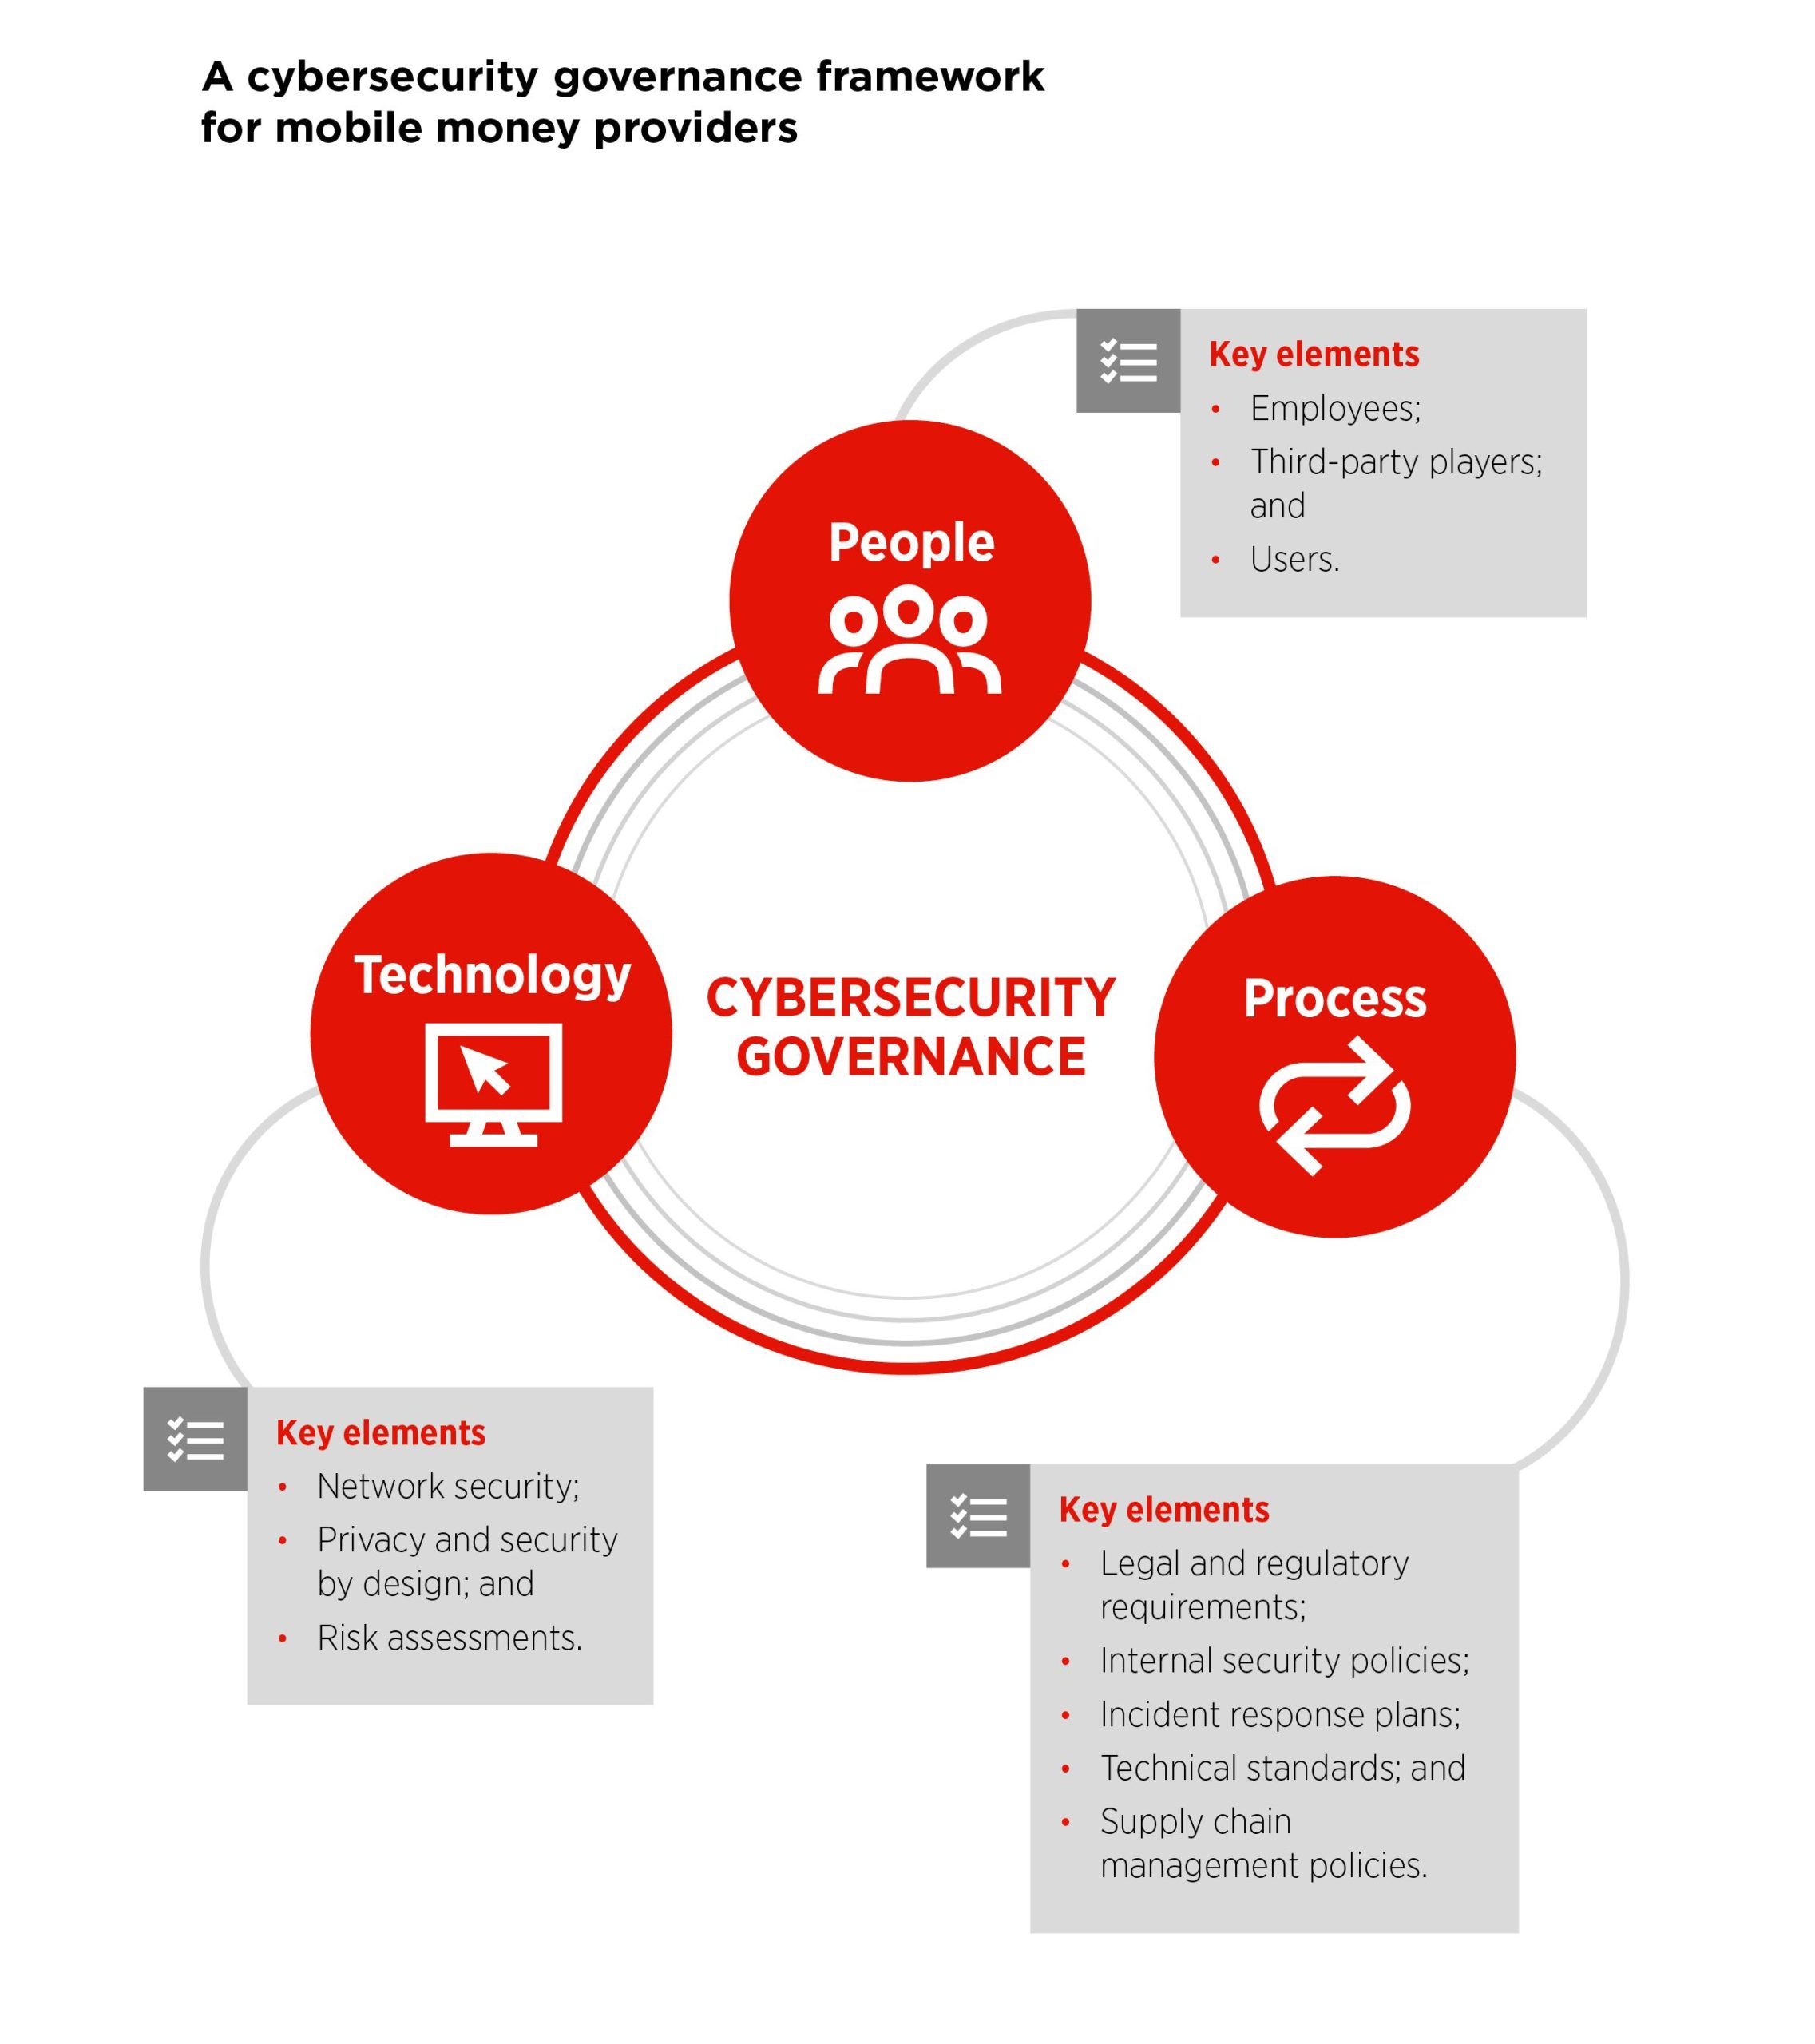 Cybersecurity a governance framework for mobile money providers